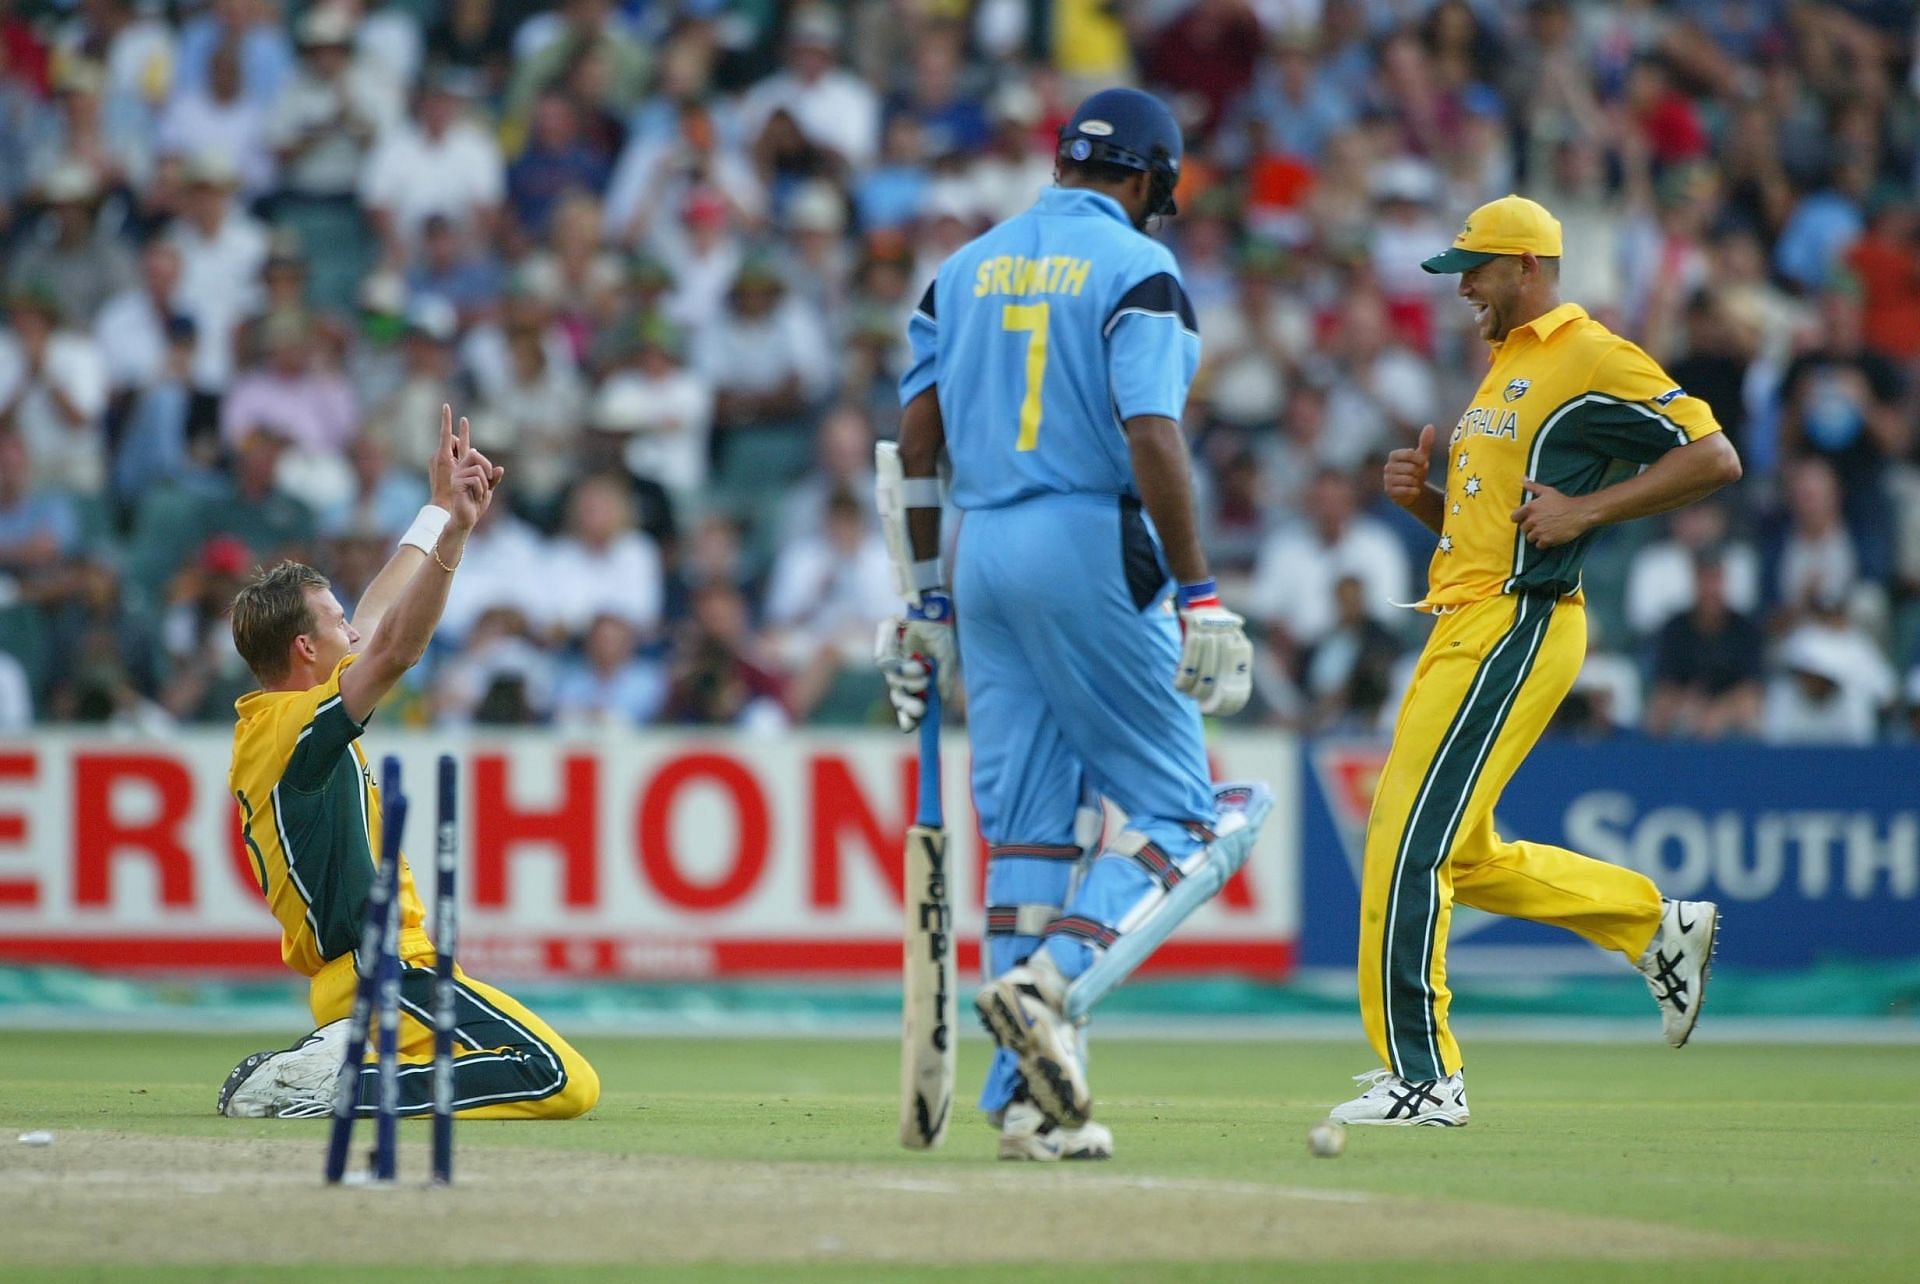 India got hammered by Australia in the 2003 World Cup final. (Pic: Getty Images)